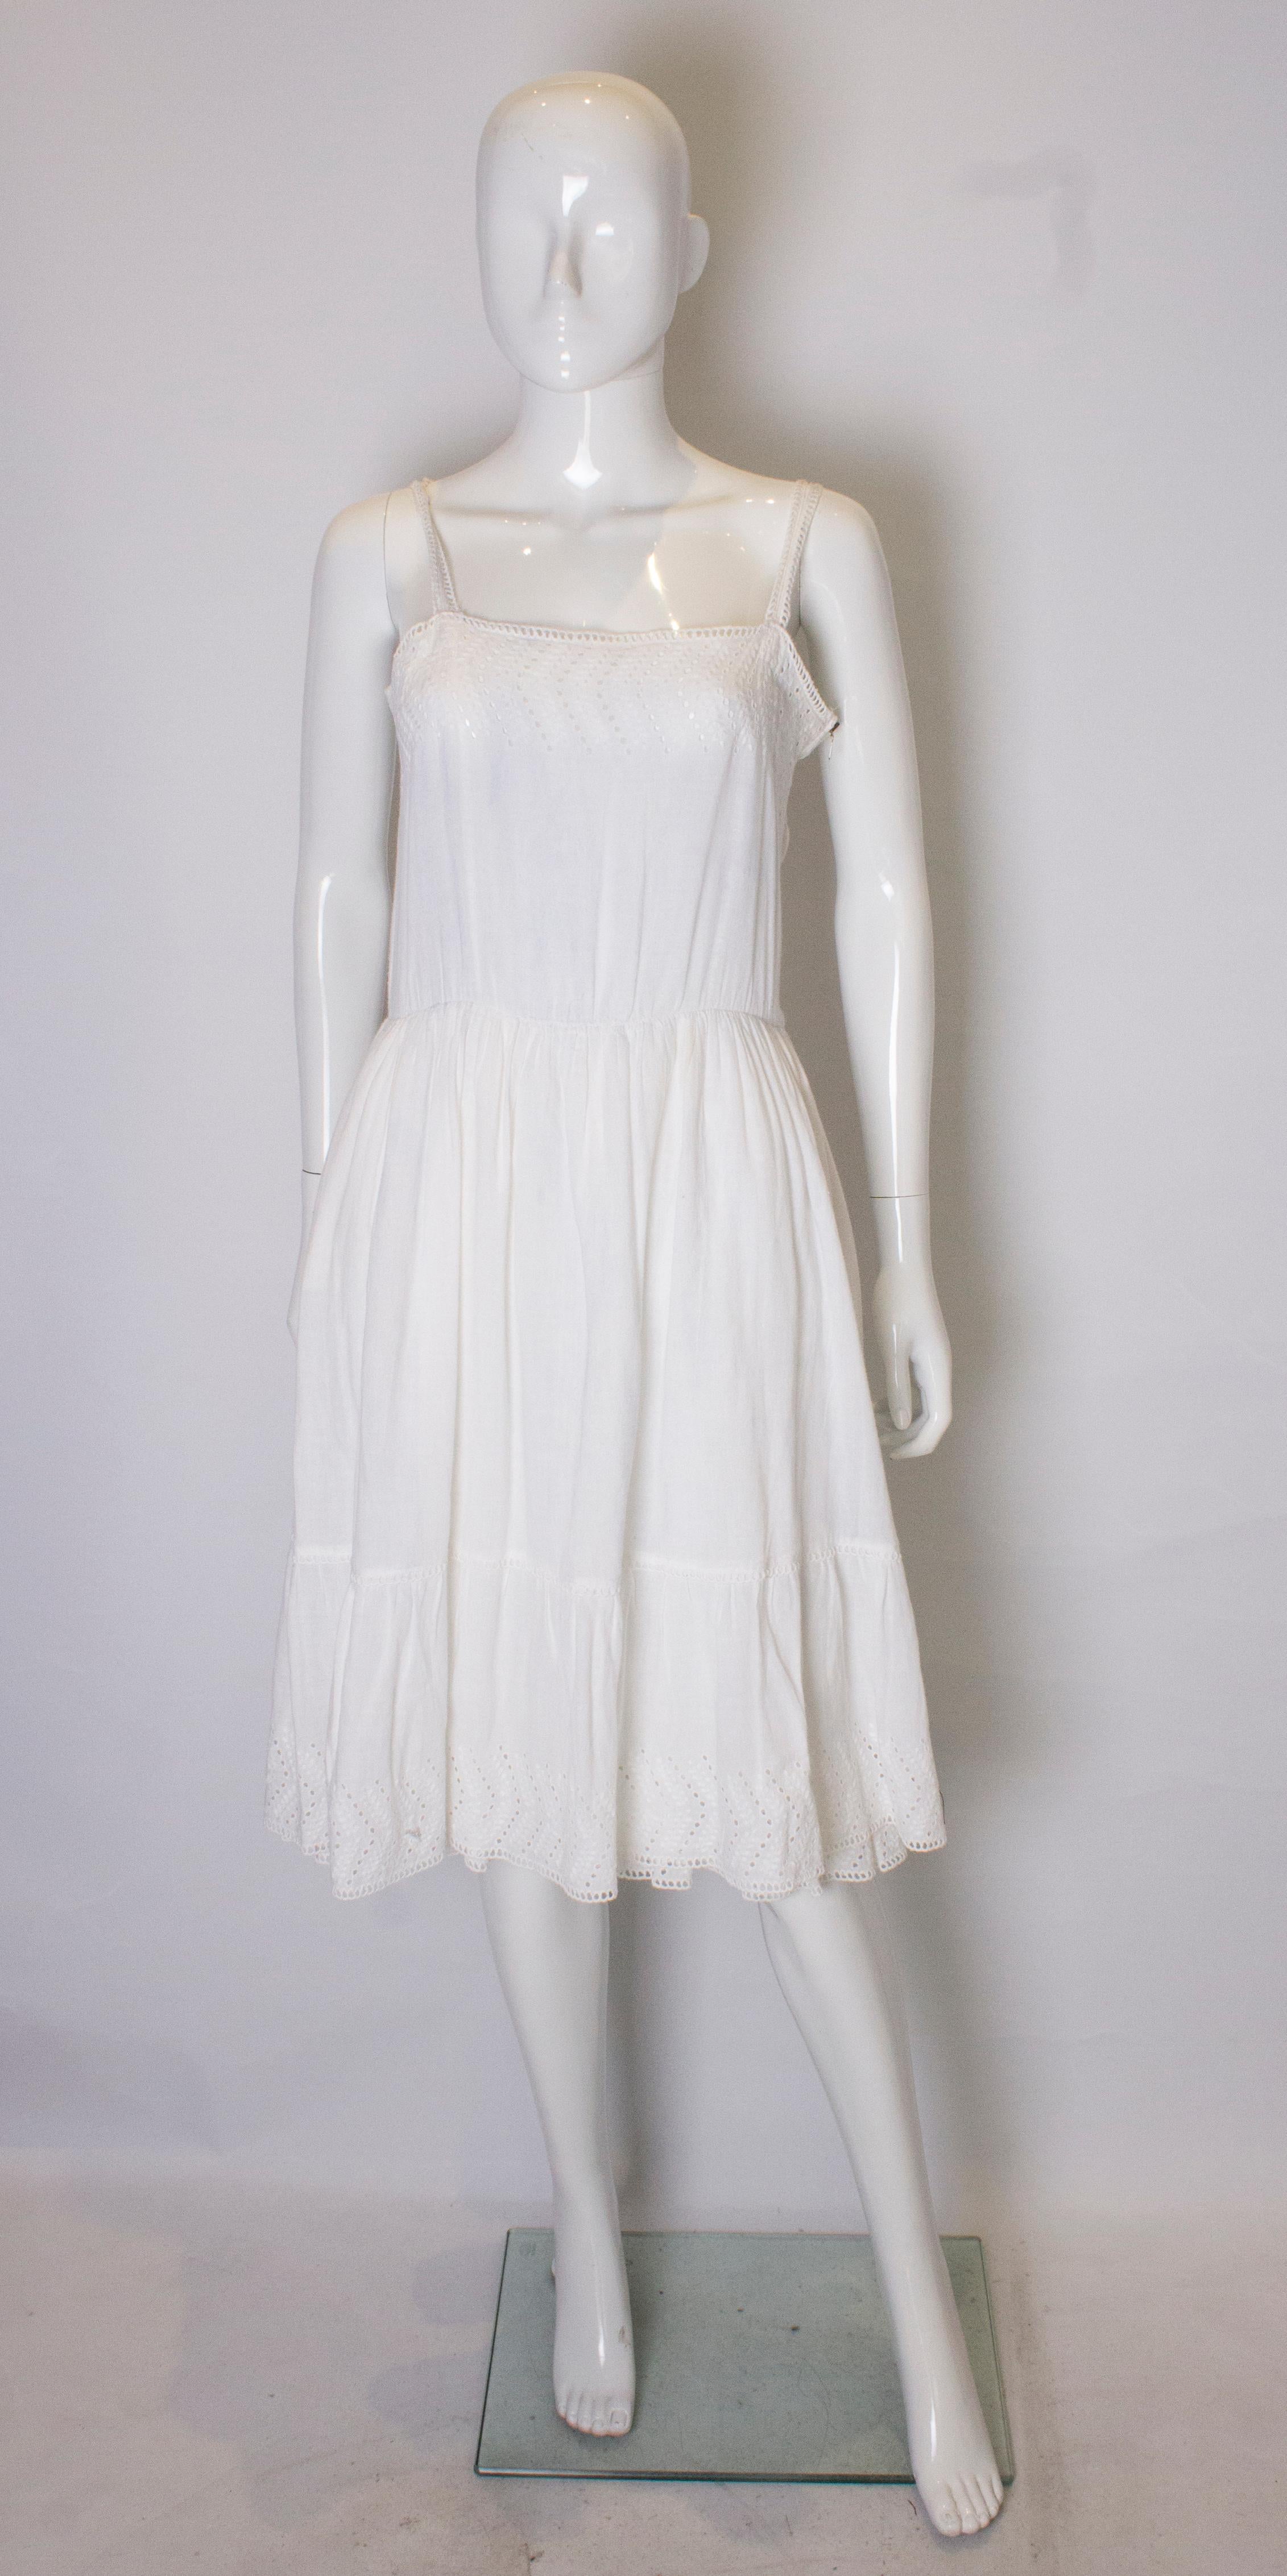 A great dress for Summer from  Louis Feraud. The dress has detail on the bodice , front and back,gathering at the waist, two layers of skirt and a frill at the hem. It has a side zip opening.